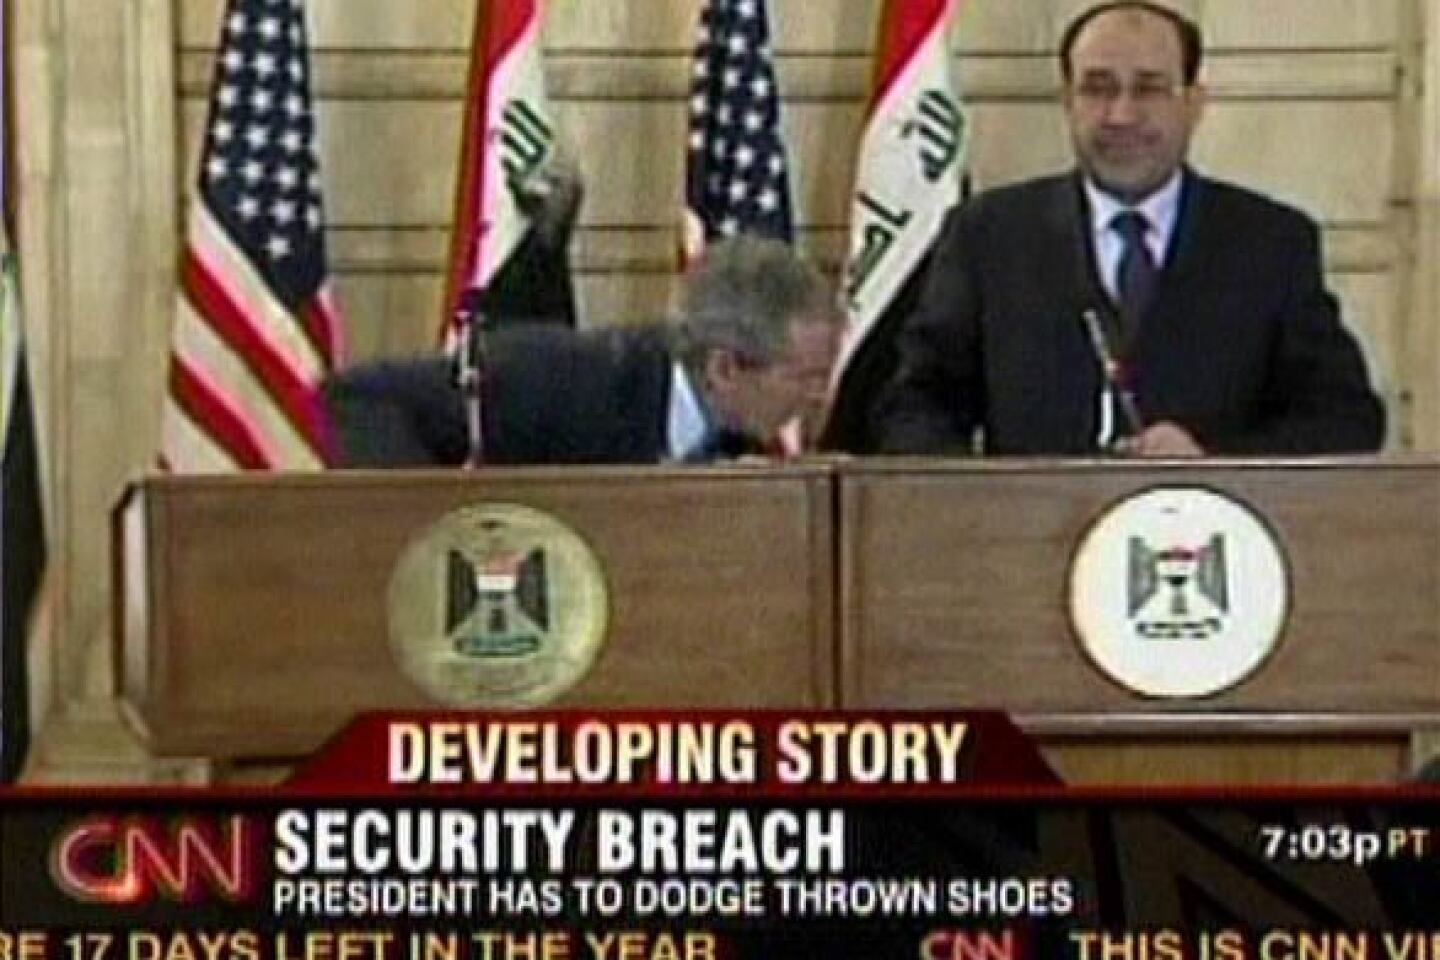 A screen grab from CNN shows President Bush ducking as a journalist hurled two shoes at him during a news conference with Prime Minister Nouri Maliki in Baghdad. "This is a gift from the Iraqis. This is the farewell kiss, you dog," Muntather Zaidi shouted at Bush as he threw his footwear. Neither shoe hit its target.